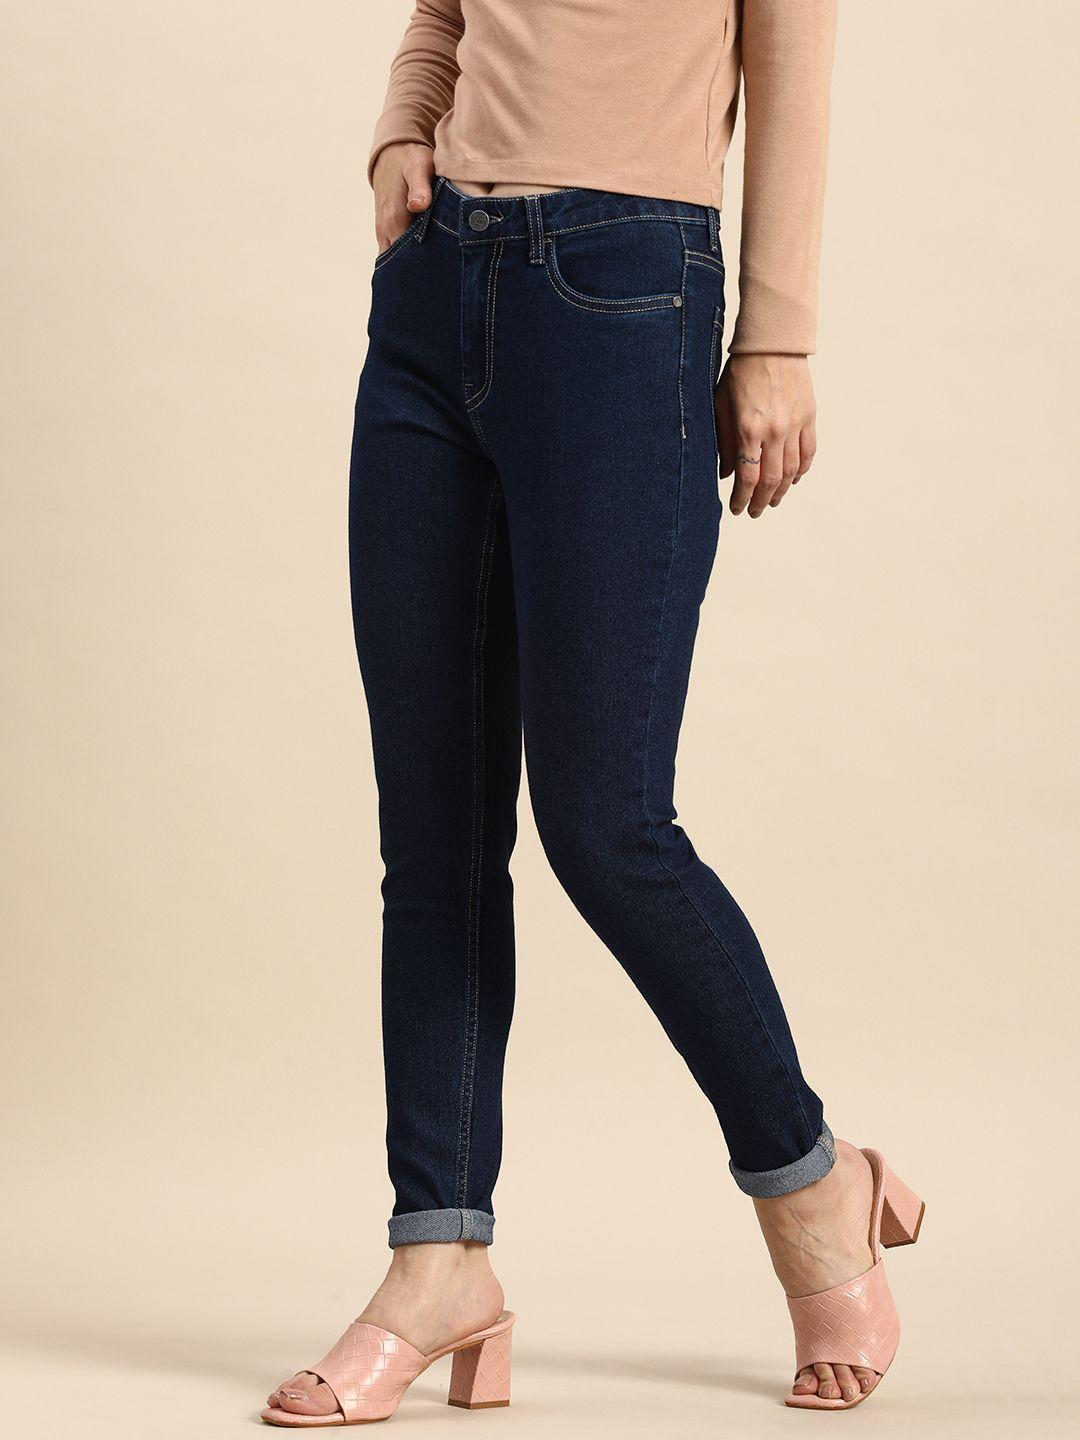 all about you women skinny fit mid-rise stretchable jeans